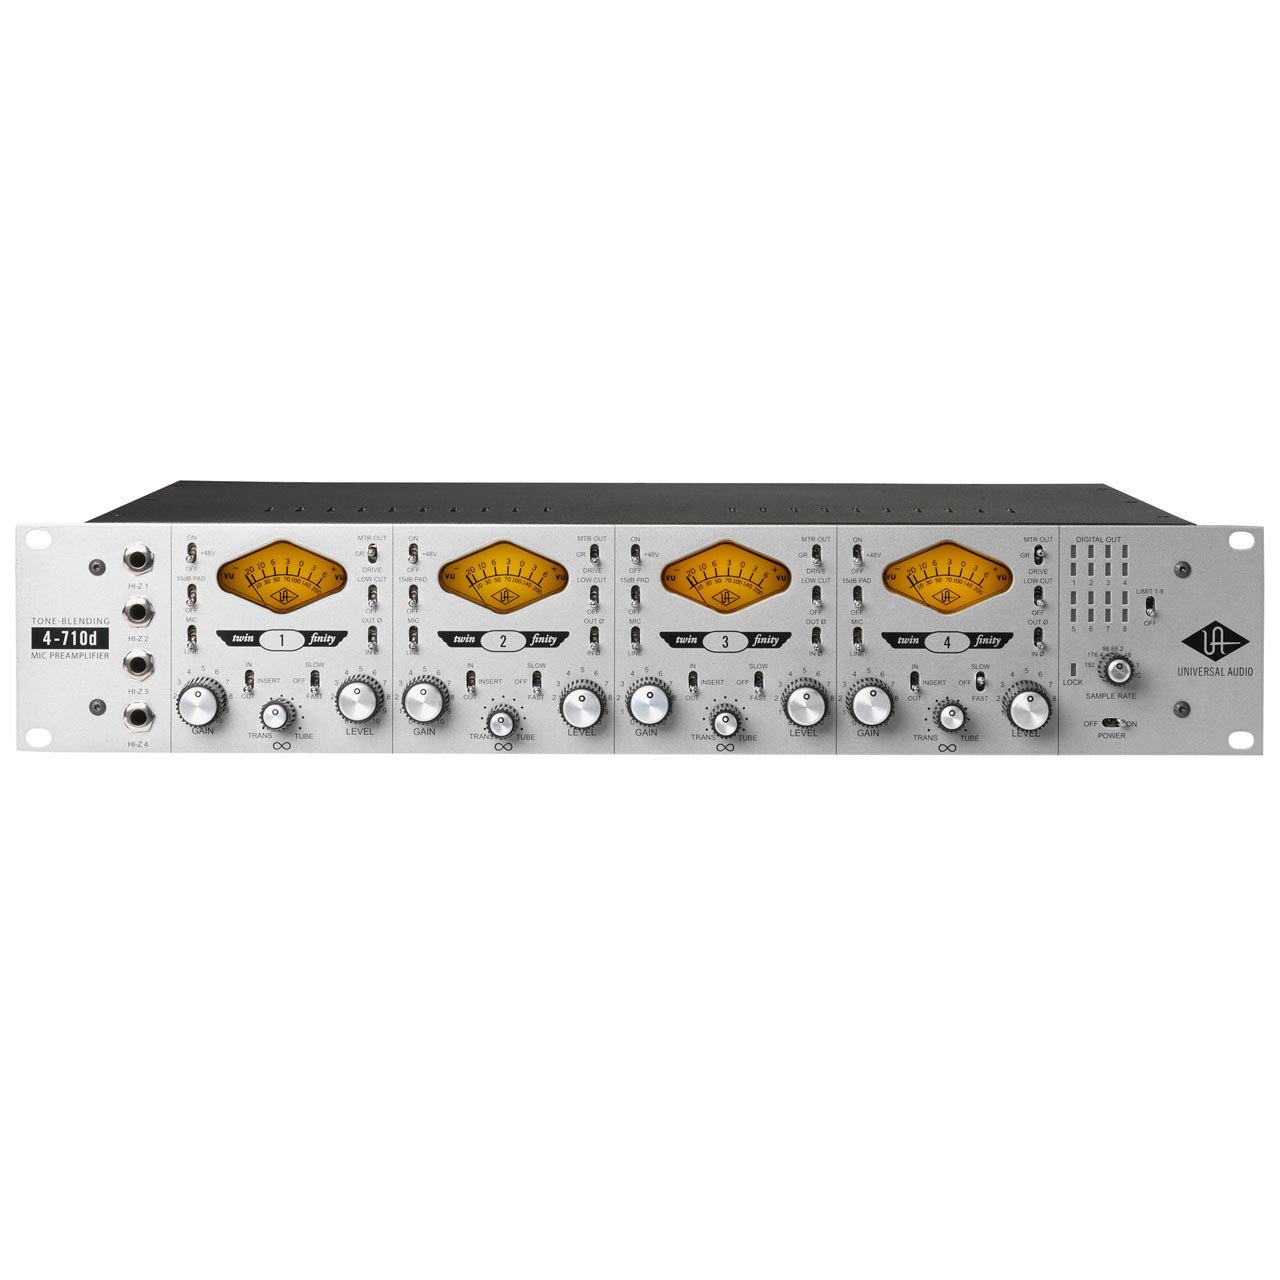 Preamps/Channel Strips - Universal Audio 4-710d Four-channel Microphone Preamplifier